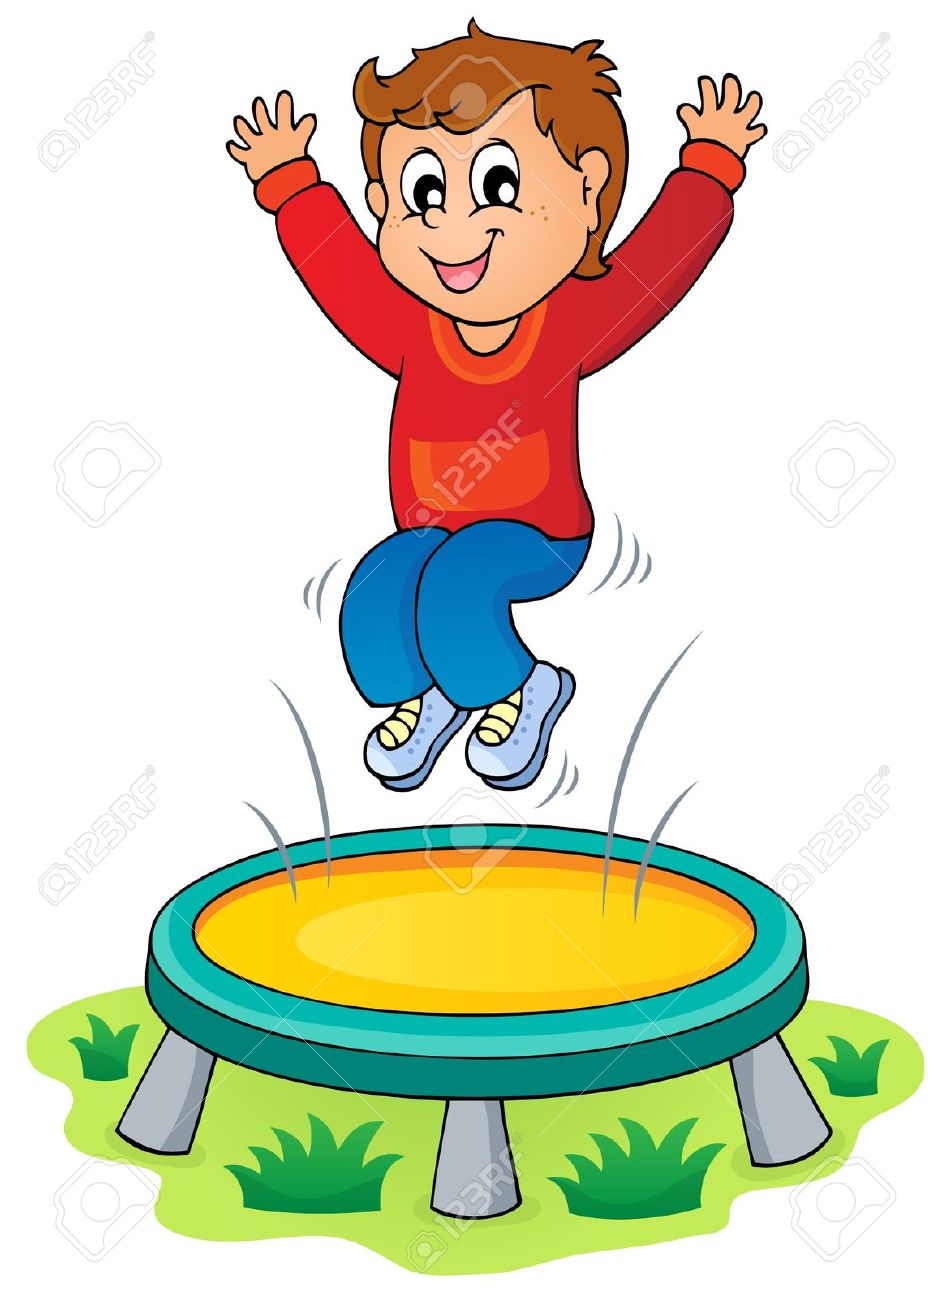 Jumping Clipart & Jumping Clip Art Images.